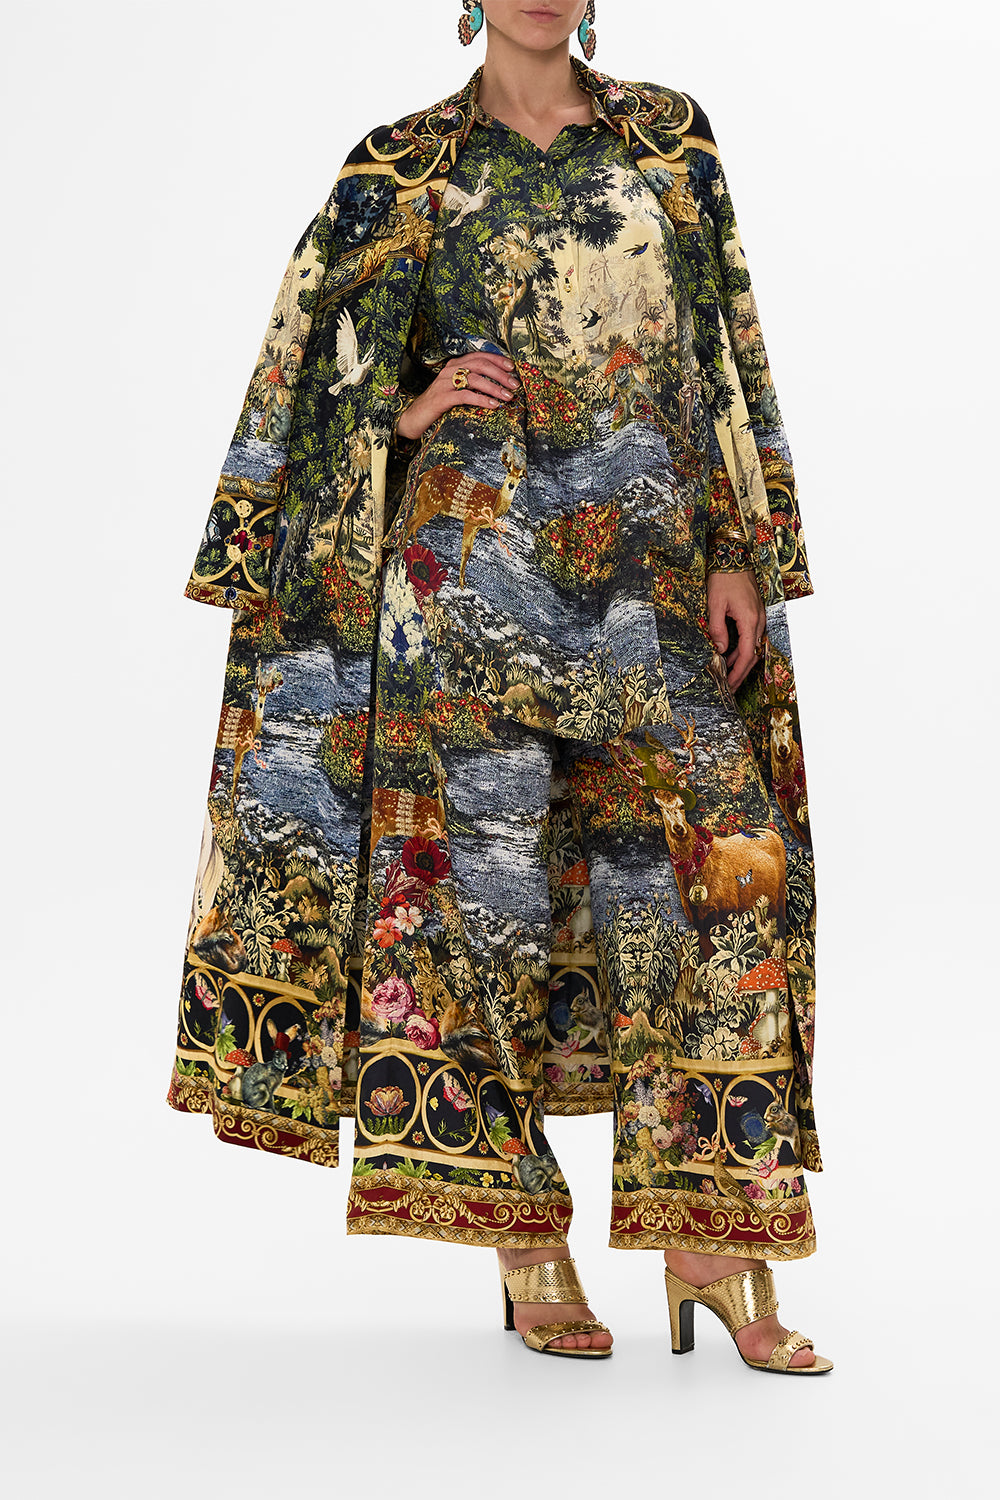 CAMILLA Floral Shirt Tunic with Pockets in Tapestry Totems